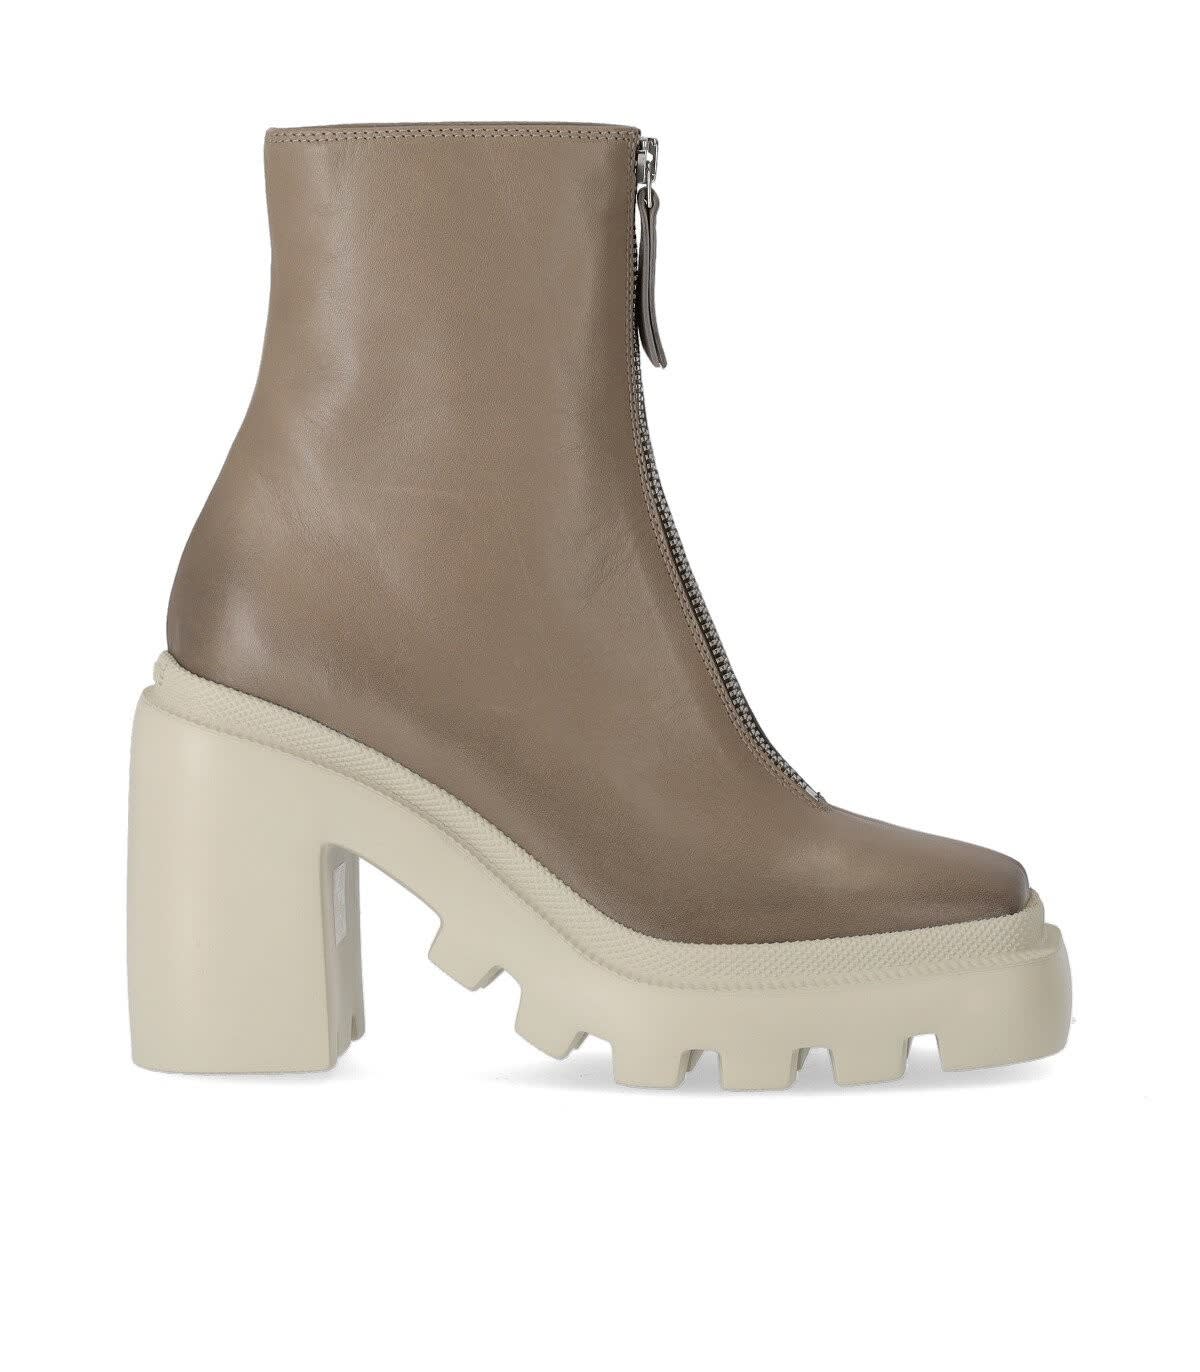 VIC MATIE VIC MATIÉ ETNA DOVE GREY HEELED ANKLE BOOT